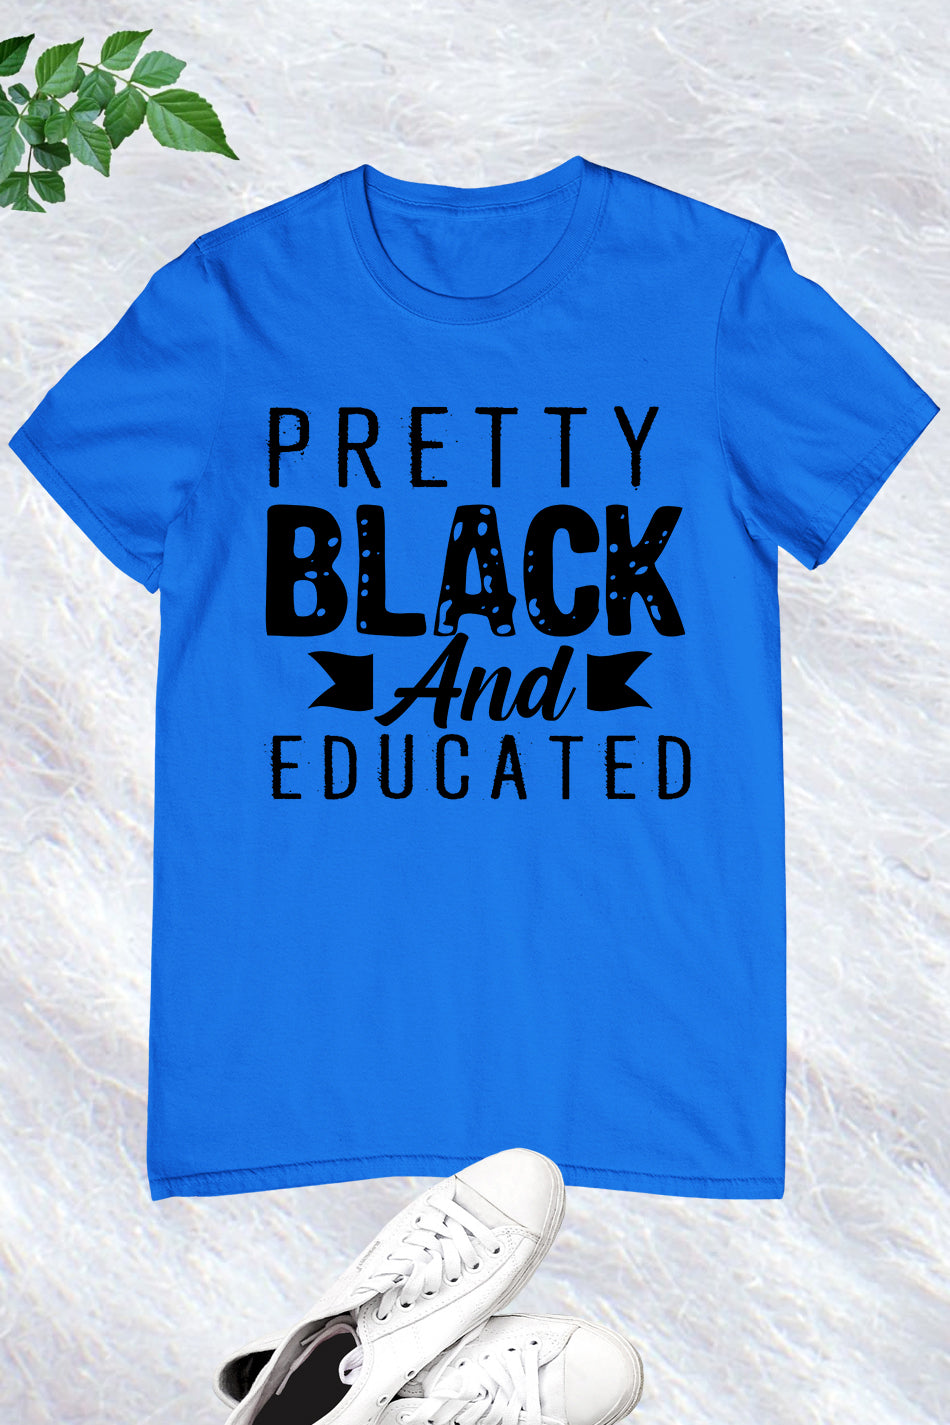 Pretty Black and Educated T Shirt